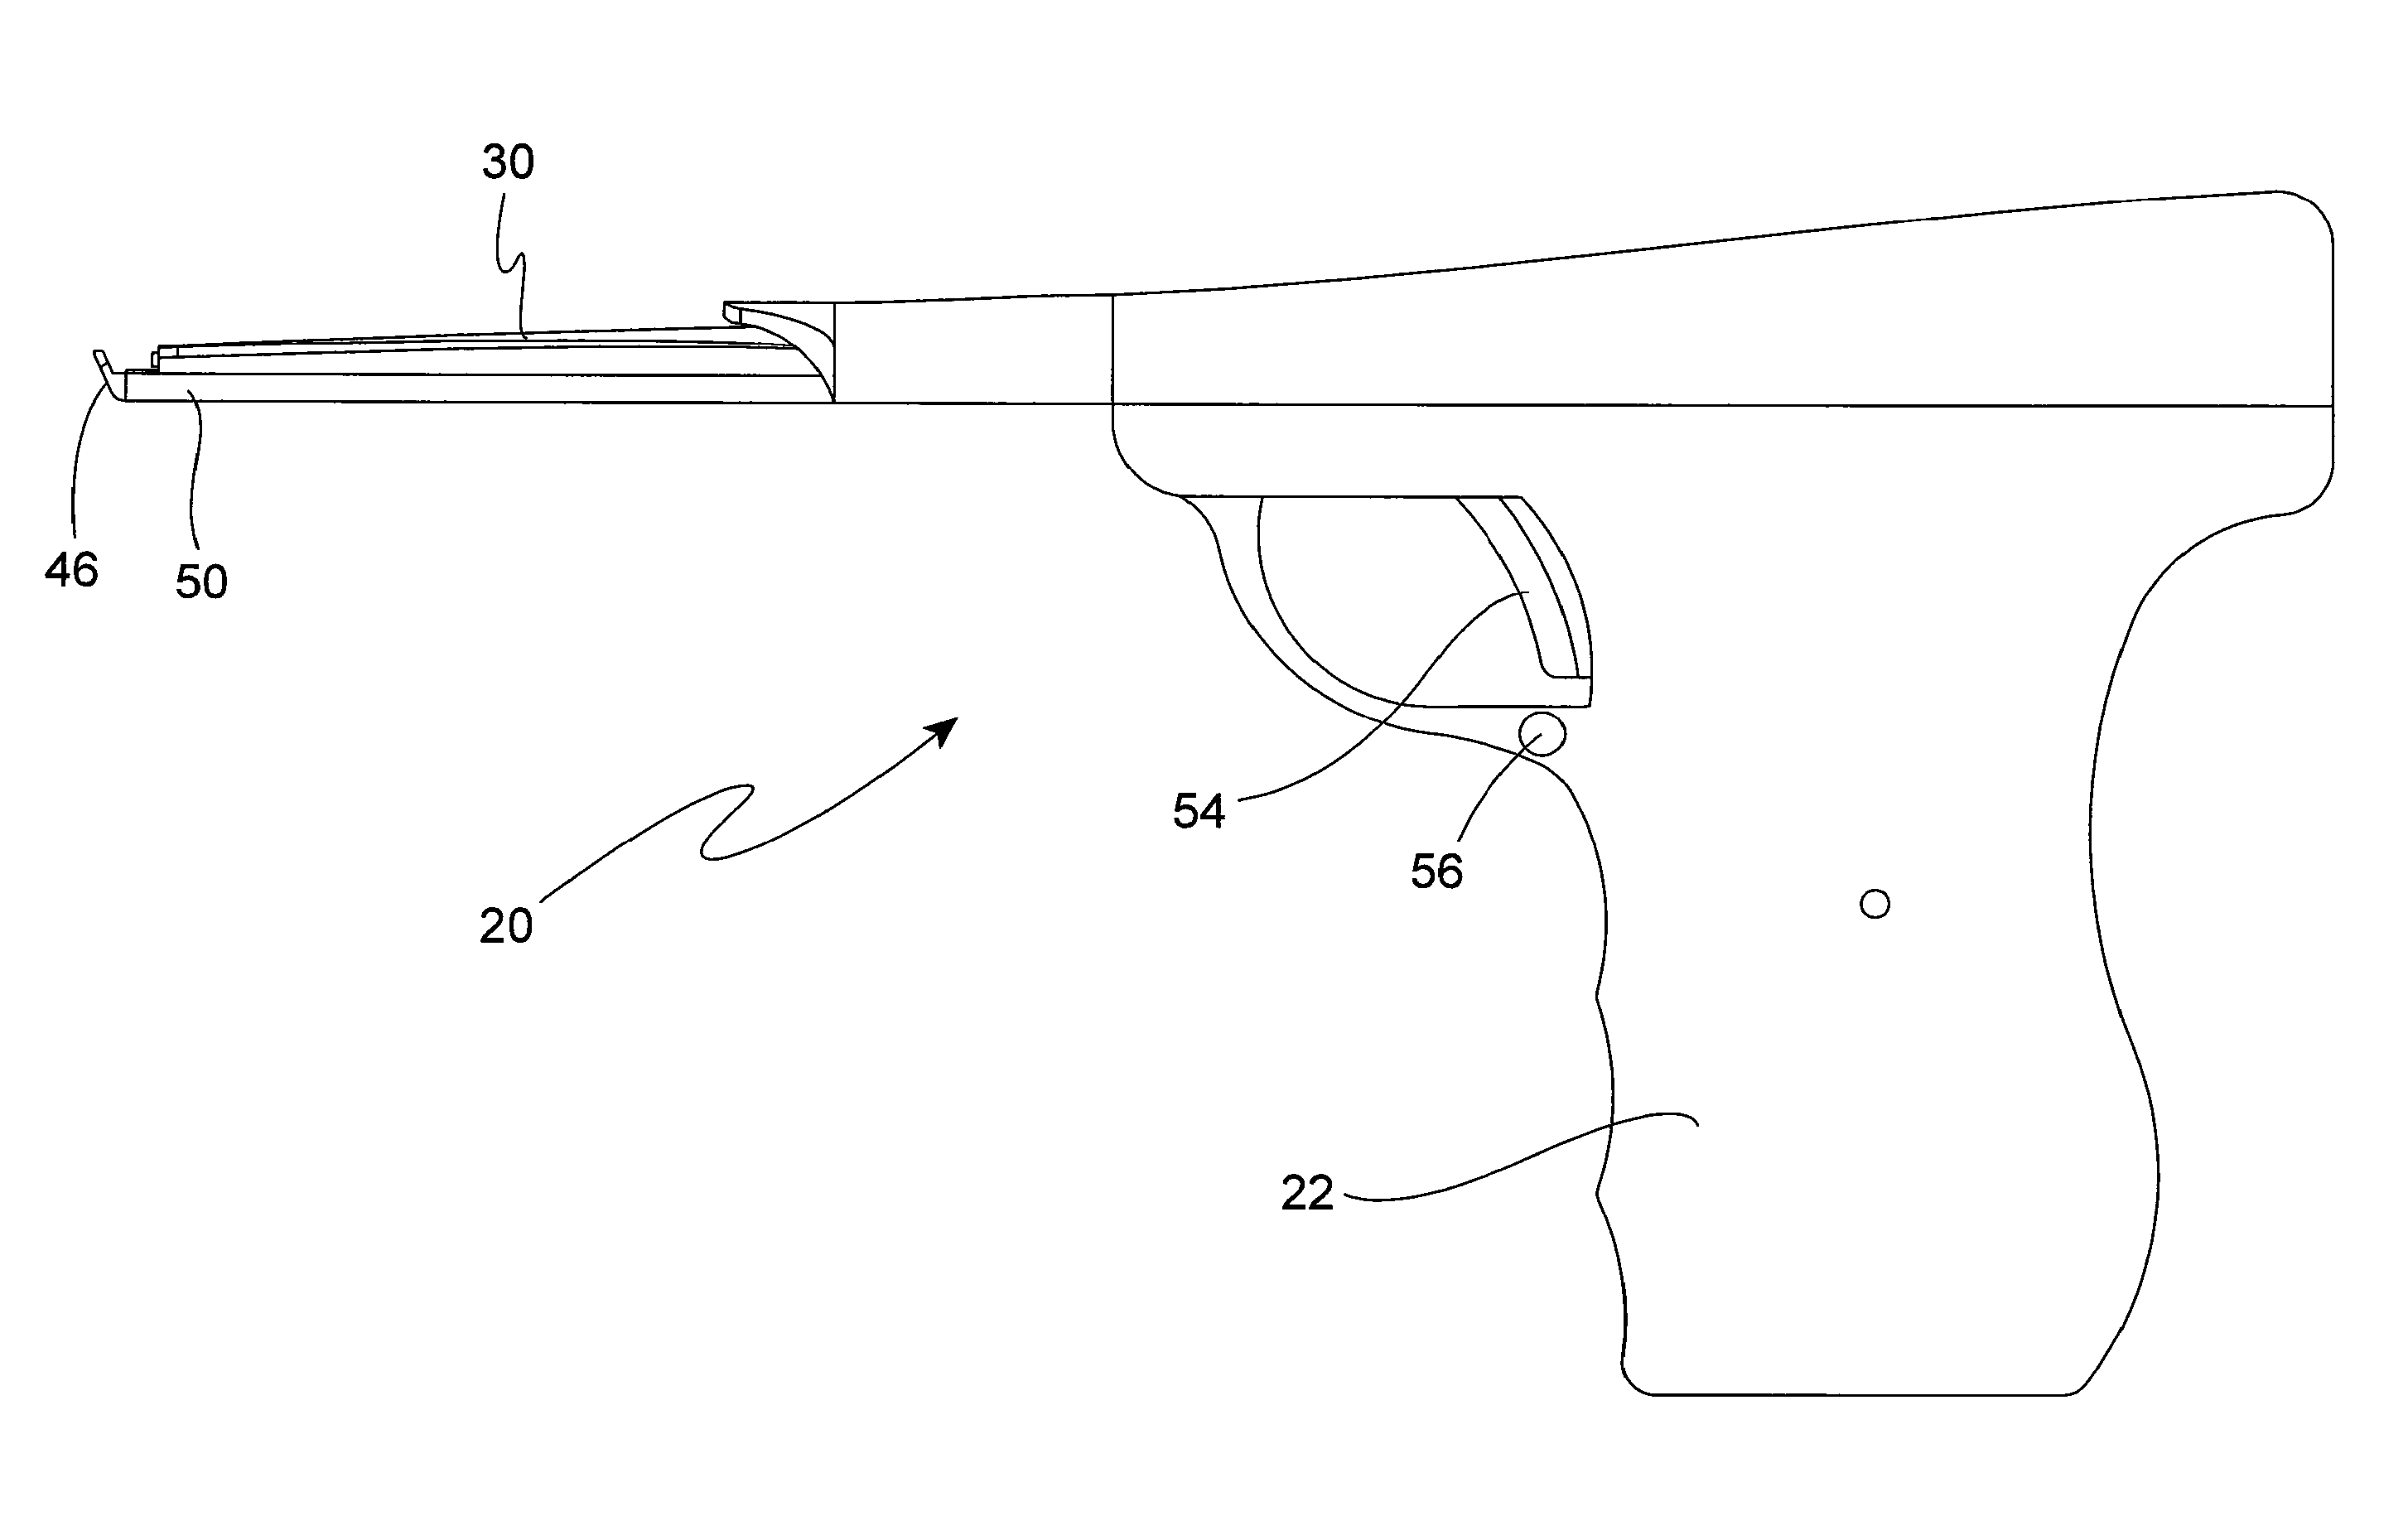 Bone-Evacuating and Valve-Exiting Resector and Method of Using Same